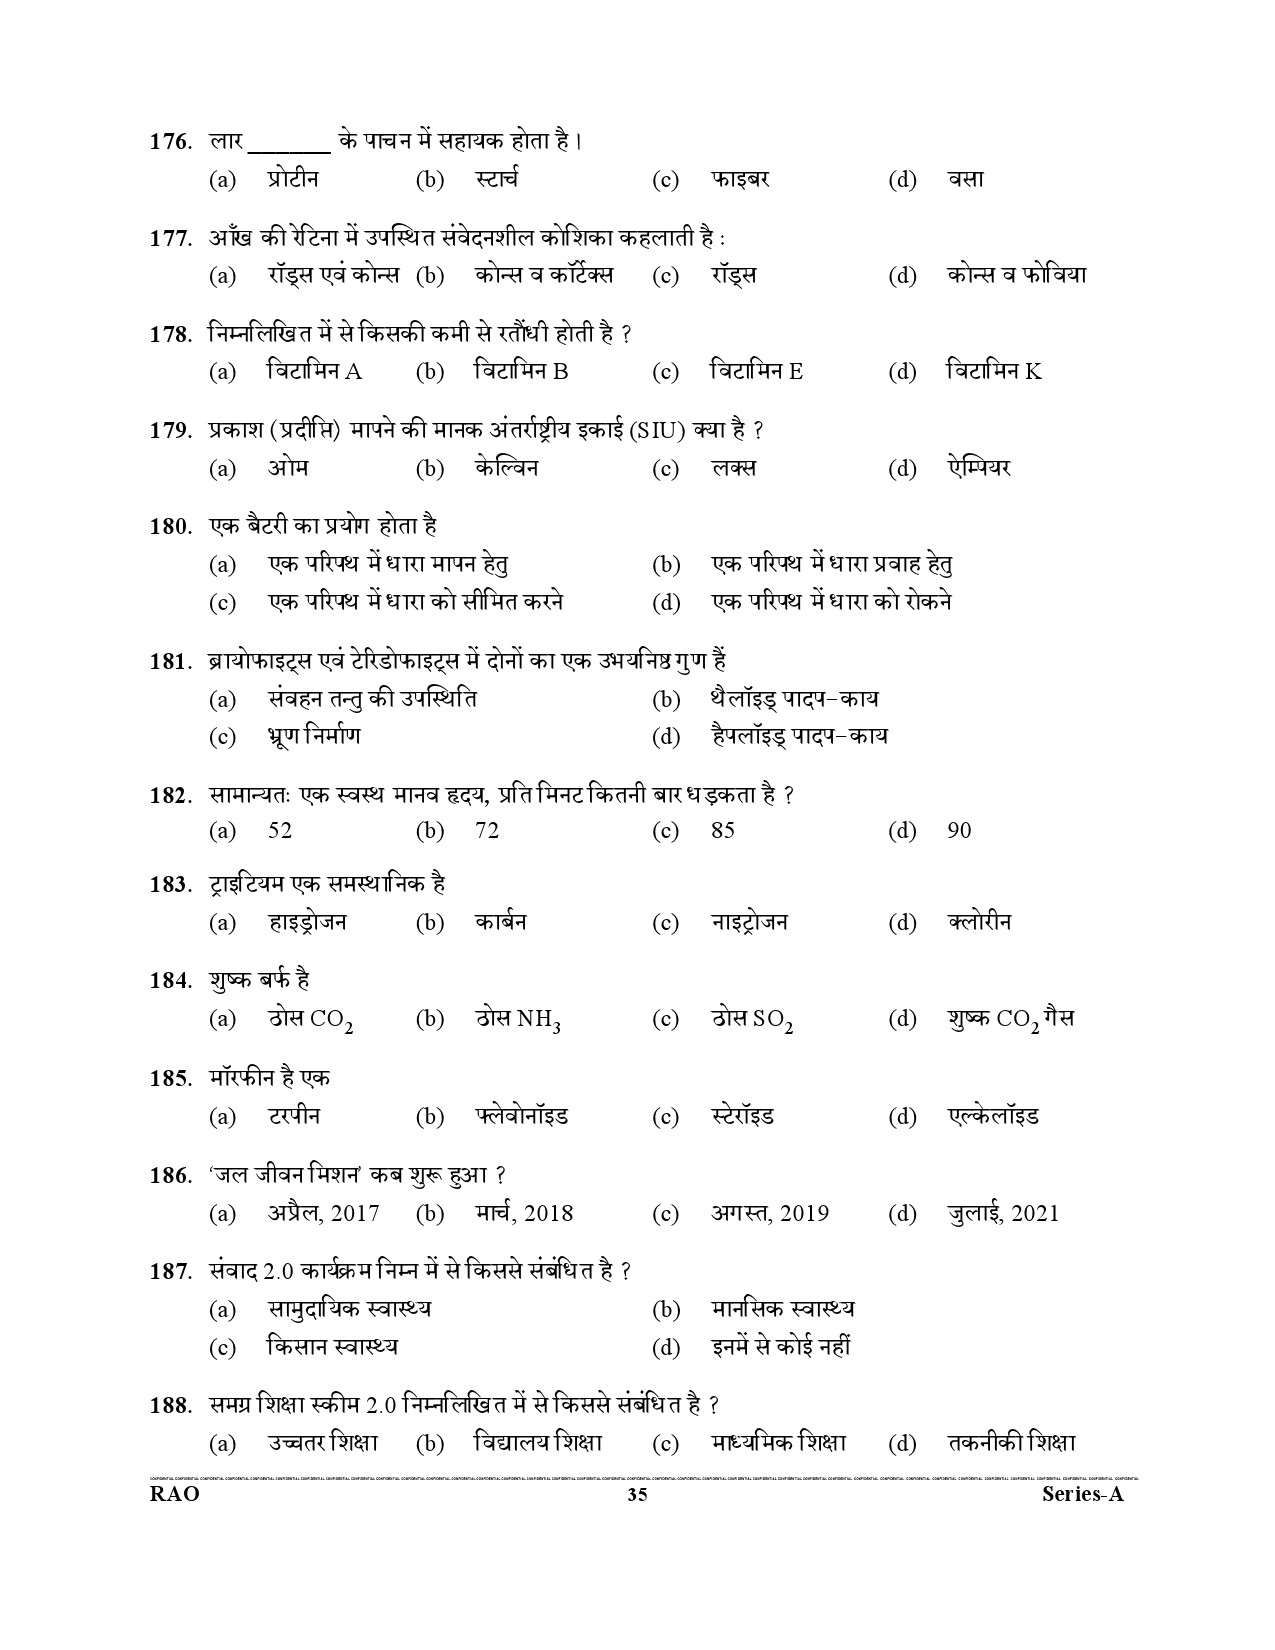 Advocate General Office Review Officer General Knowledge Preliminary 2021 35